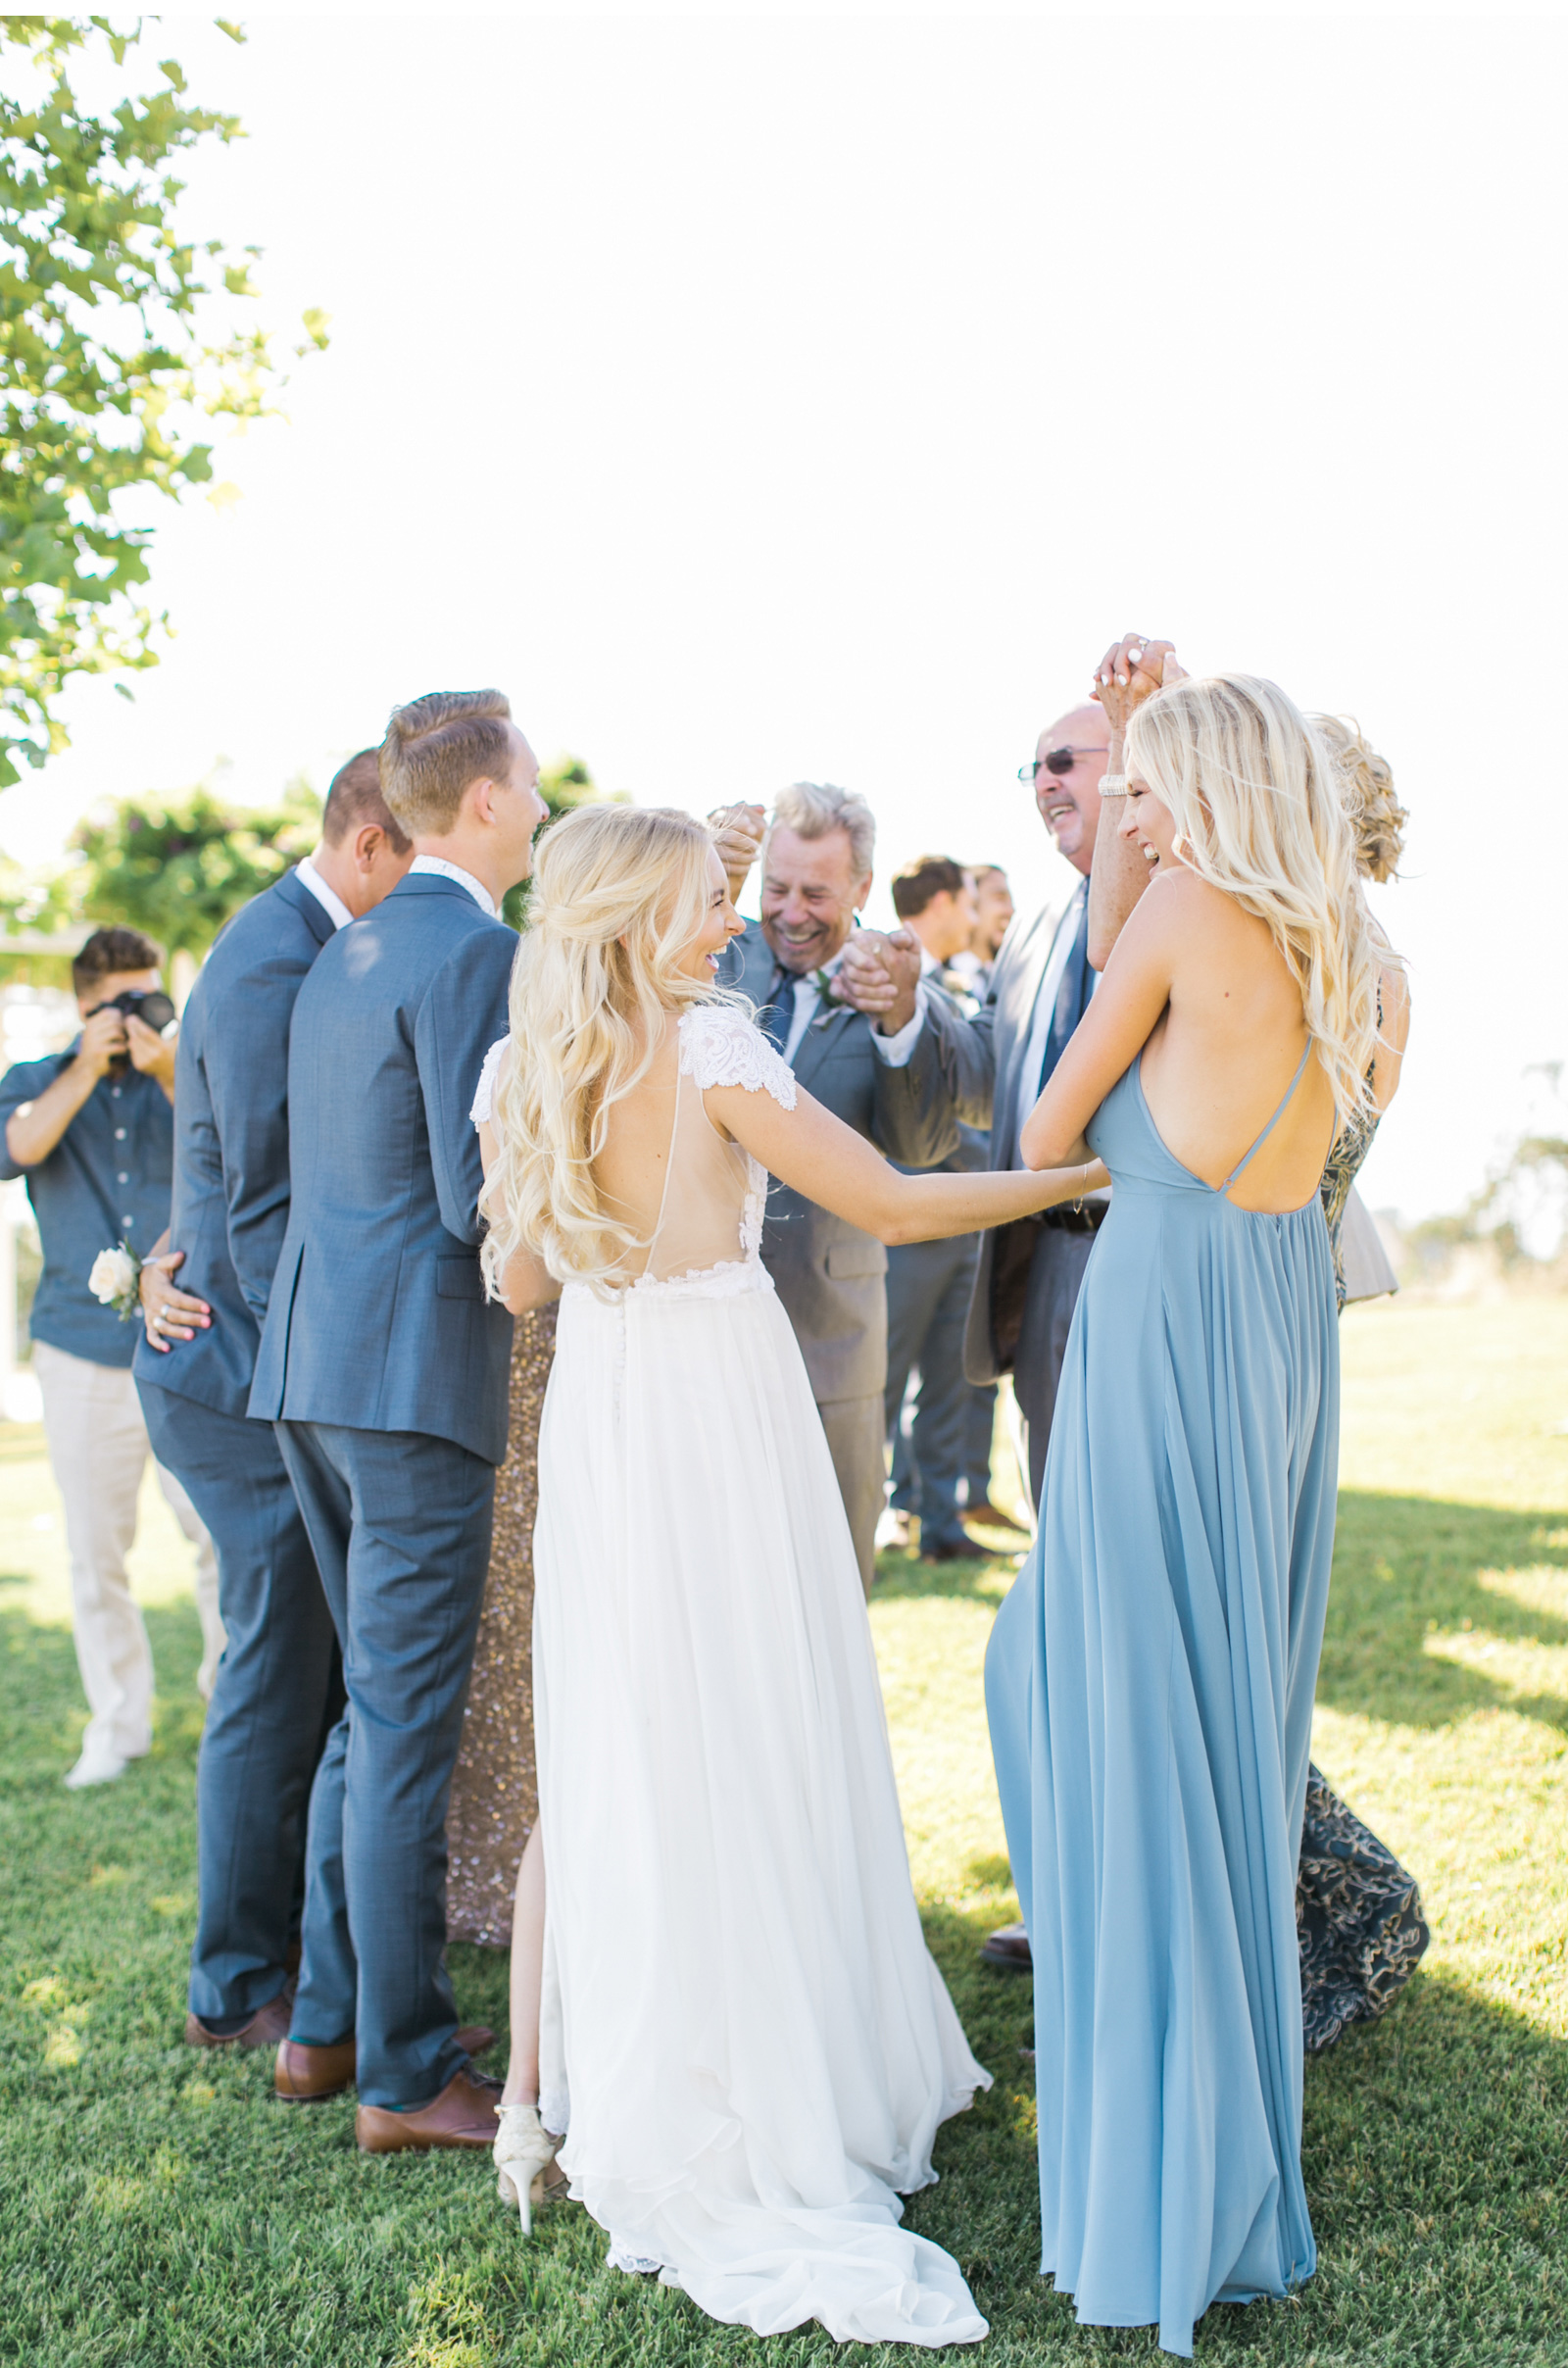 Paso-Robles-Style-Me-Pretty-The-Knot-Wedding-Natalie-Schutt-Photography's-Wedding_12.jpg